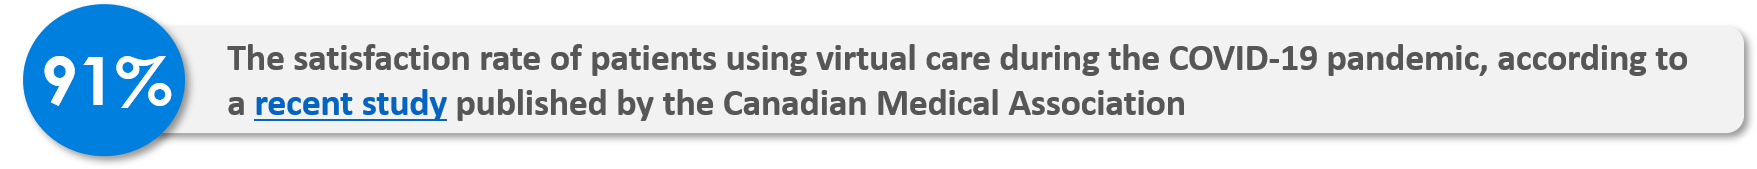 91%: The satisfaction rate of patients using virtual care during the COVID-19 pandemic, according to a recent study published by the Canadian Medical Association